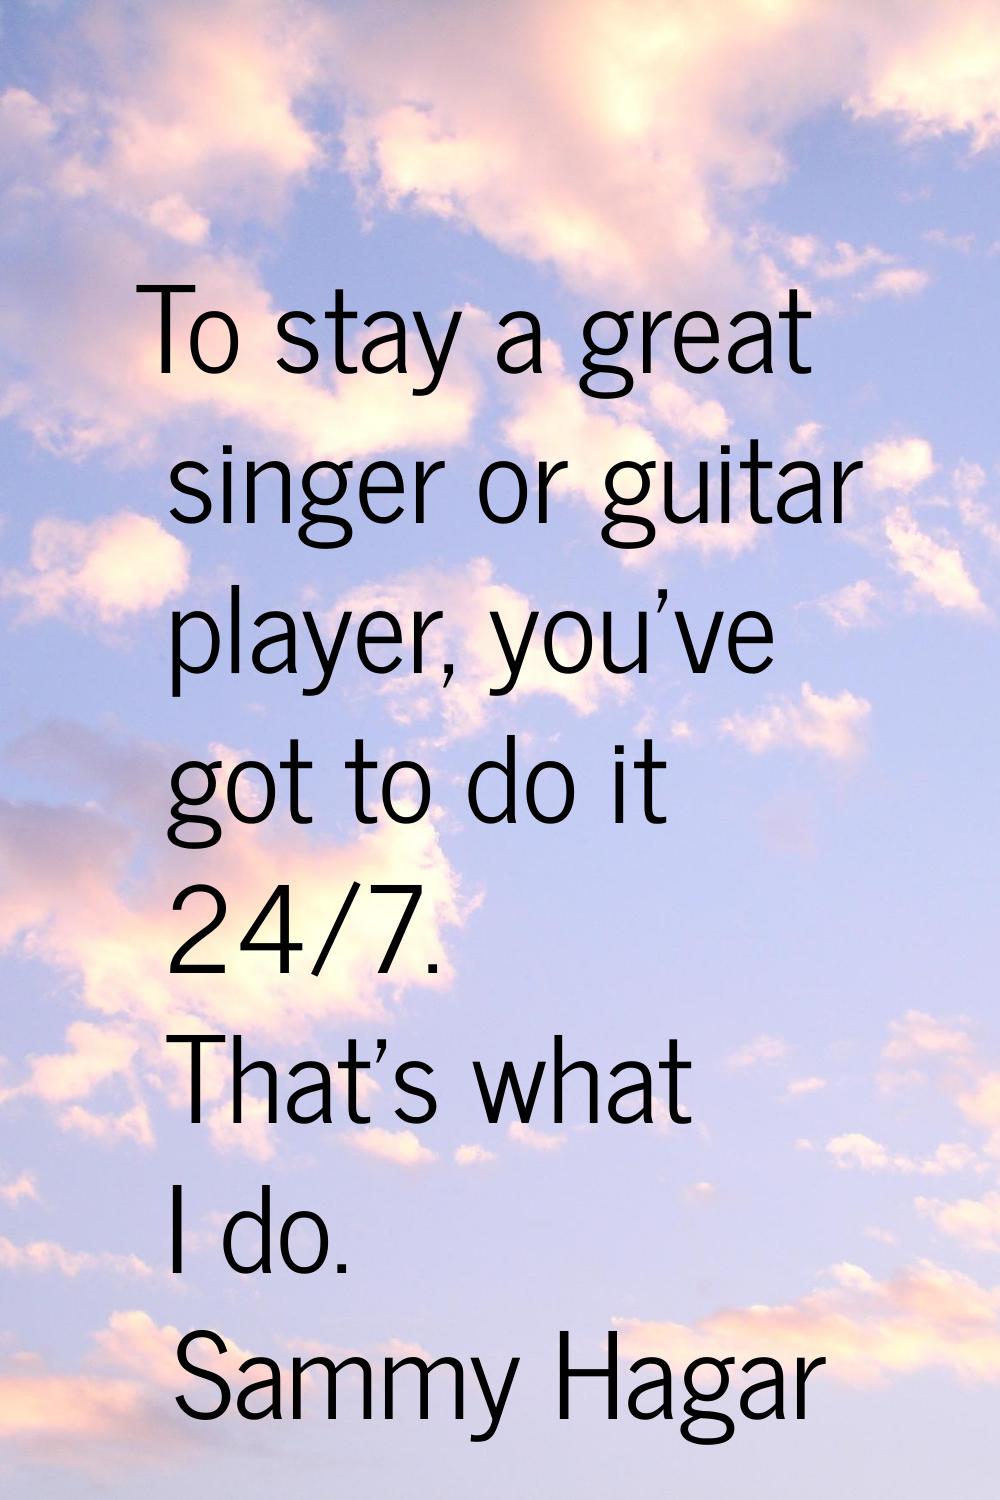 To stay a great singer or guitar player, you've got to do it 24/7. That's what I do.